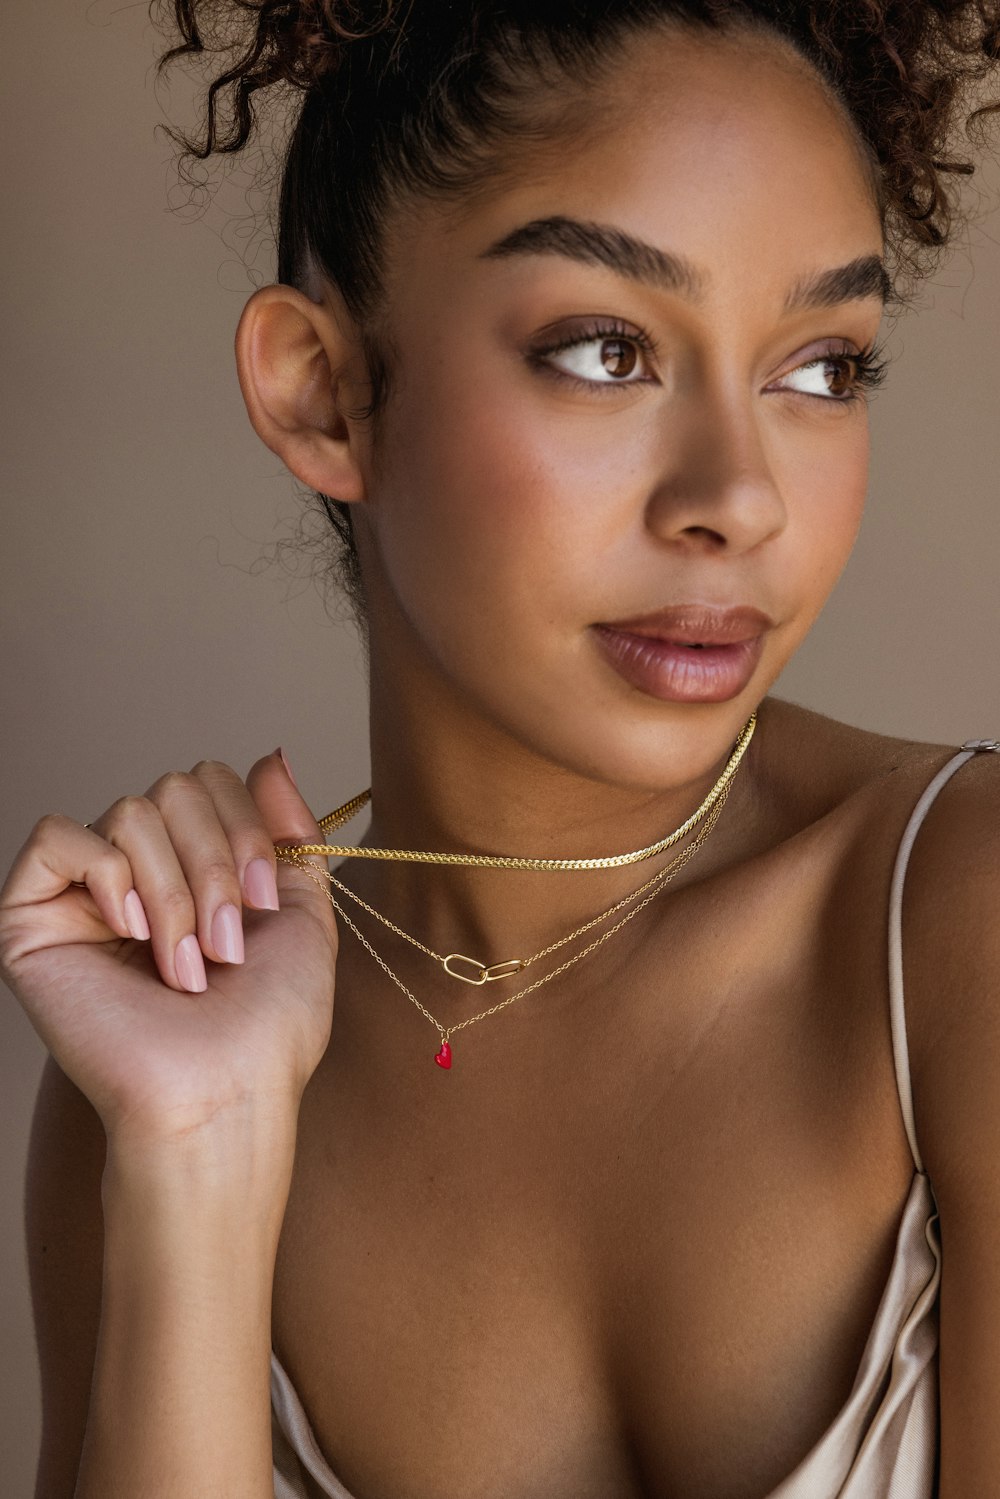 a woman wearing a necklace with a red heart on it